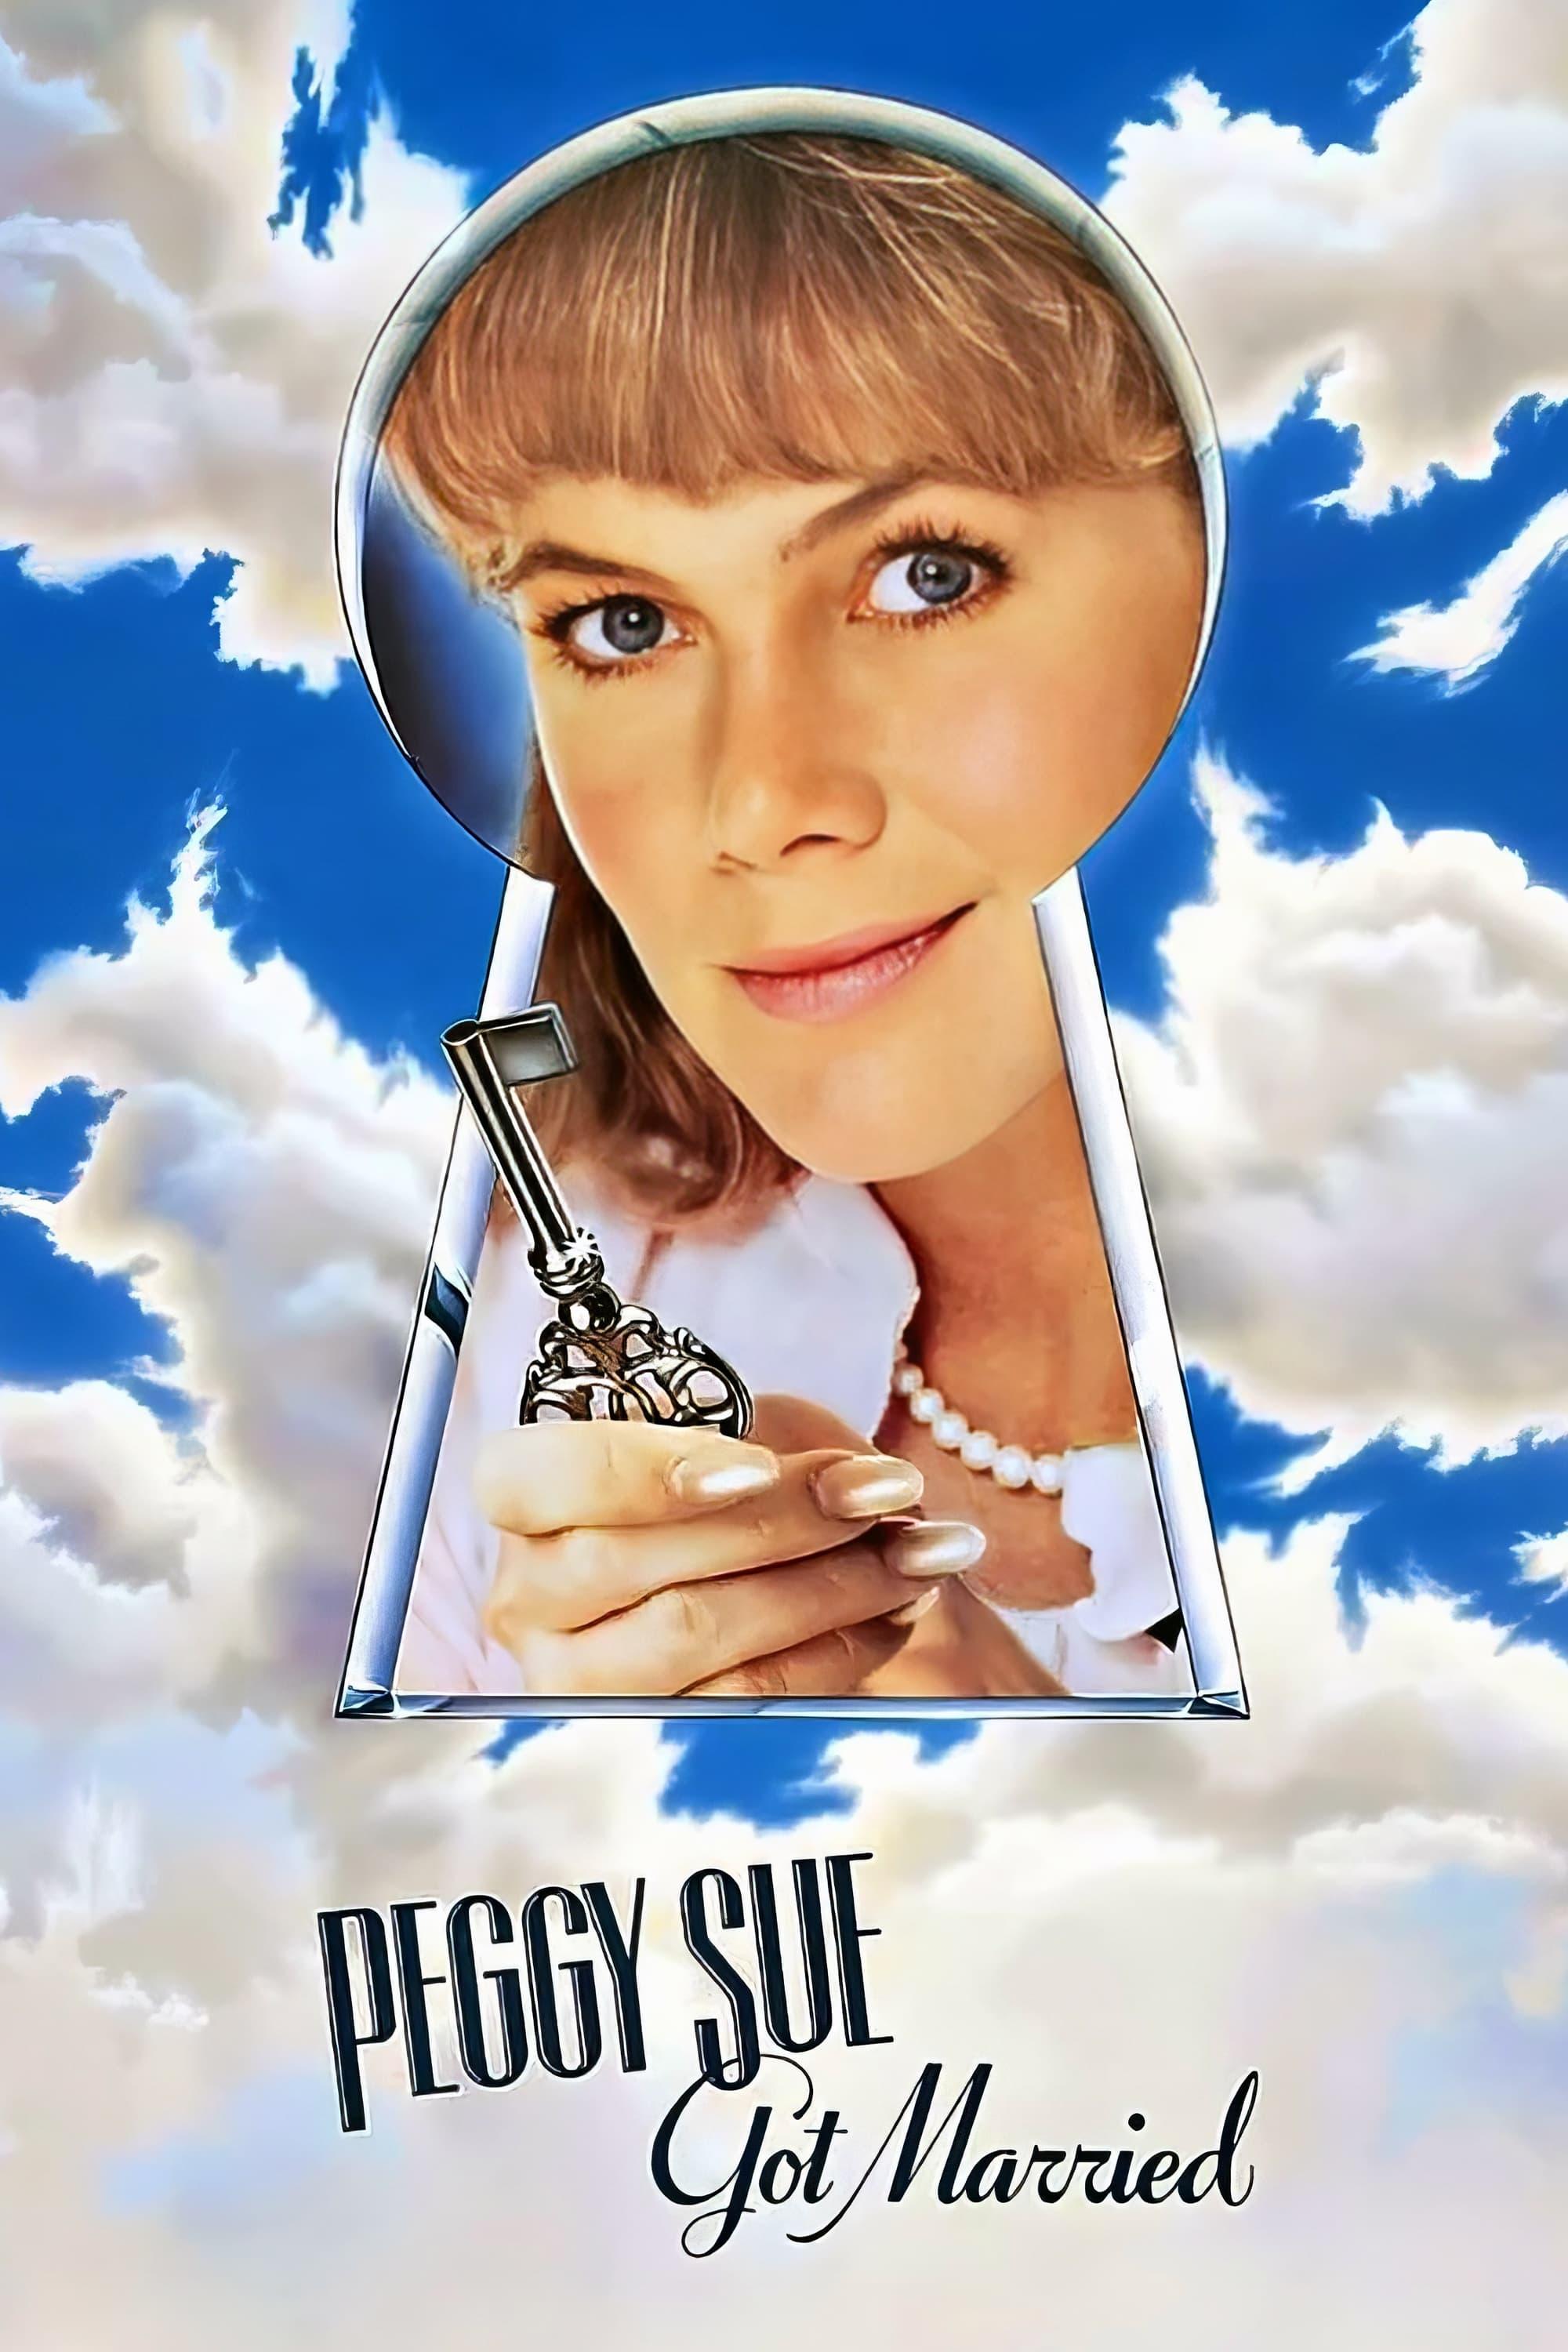 Peggy Sue Got Married poster